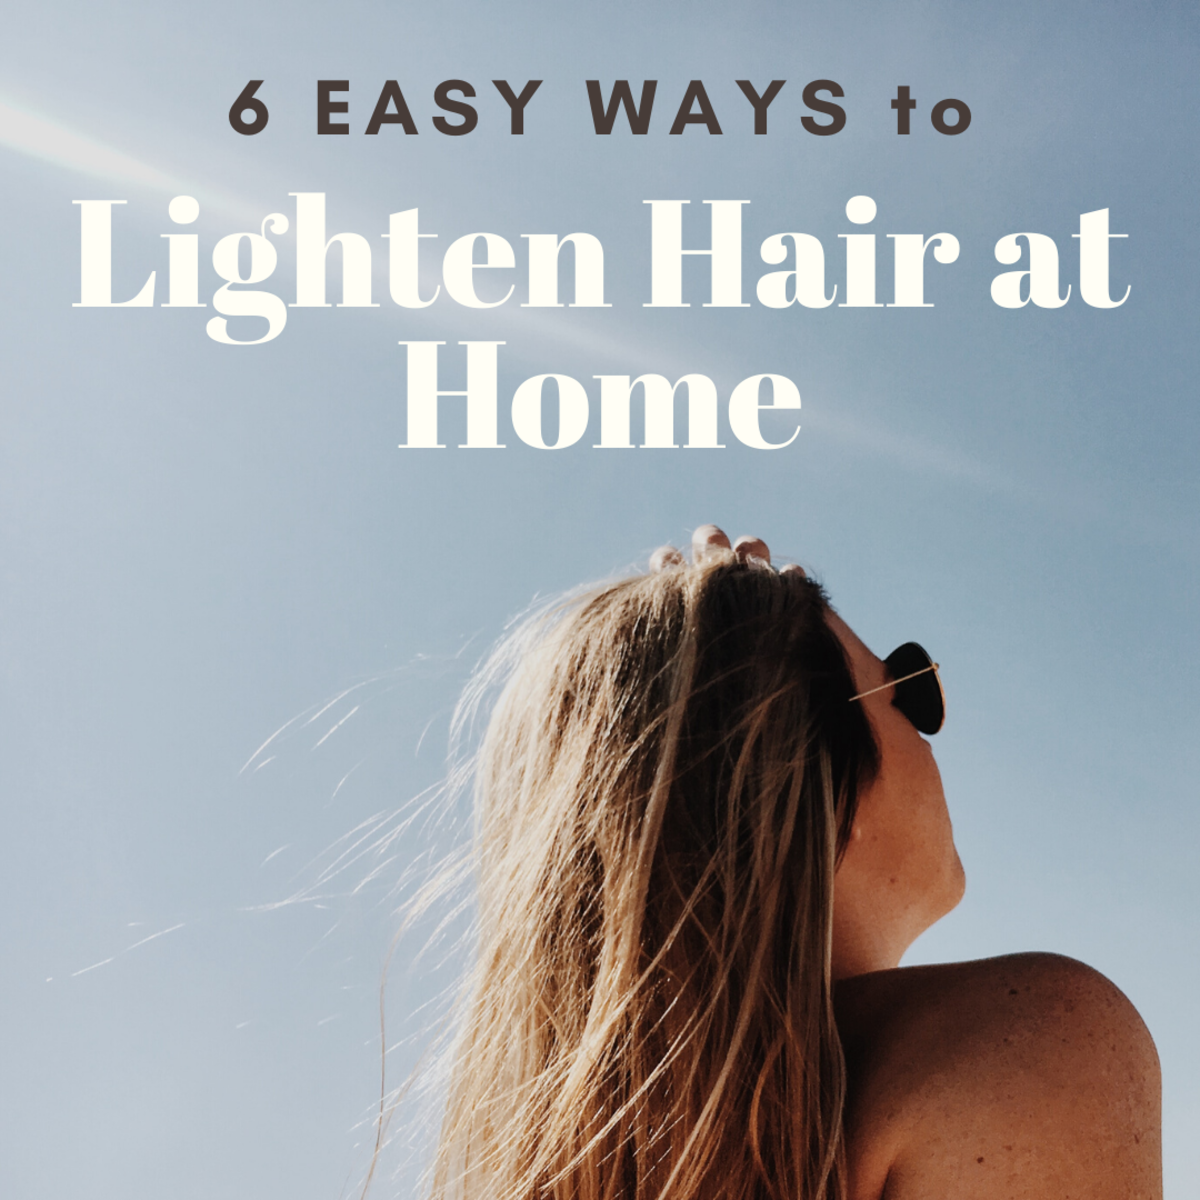 Lightening your hair doesn't necessarily require an expensive trip to the salon! Here are six easy ways to lighten hair at home. 